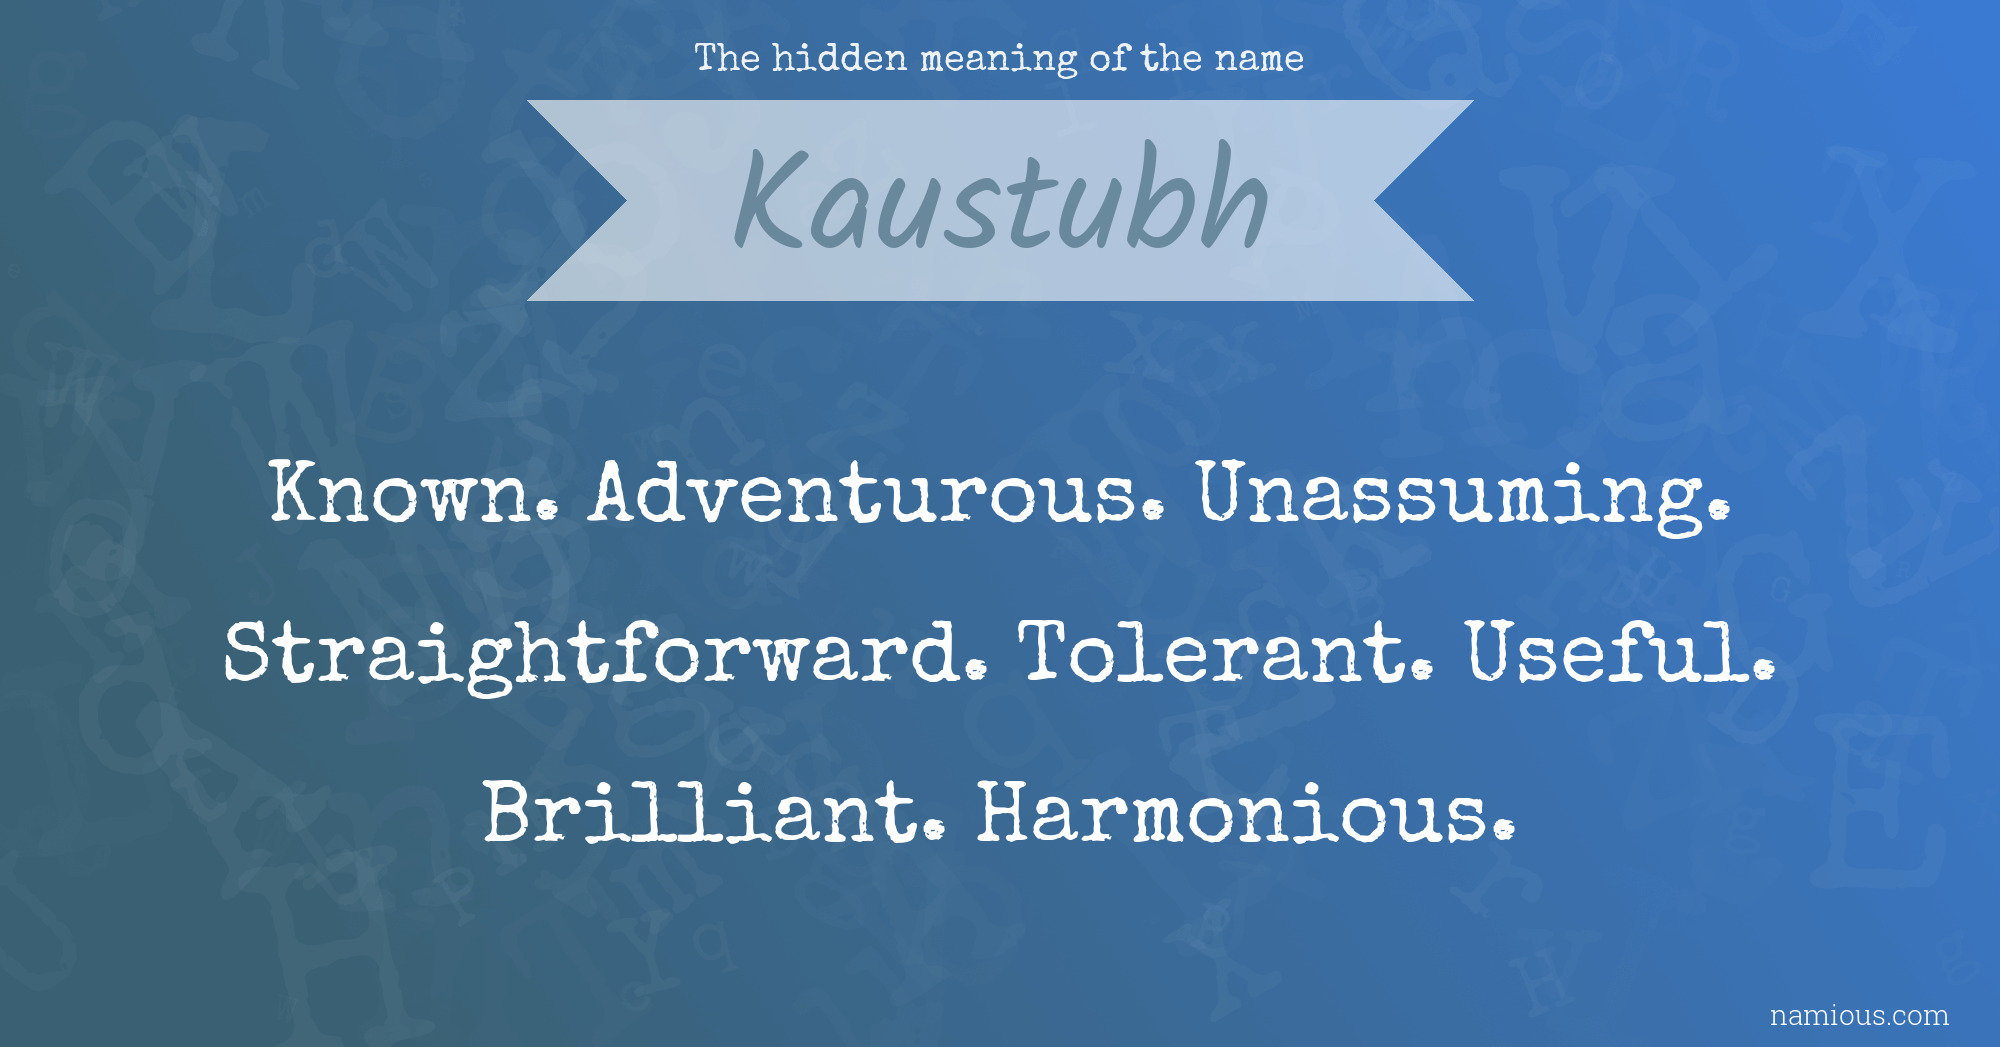 The hidden meaning of the name Kaustubh